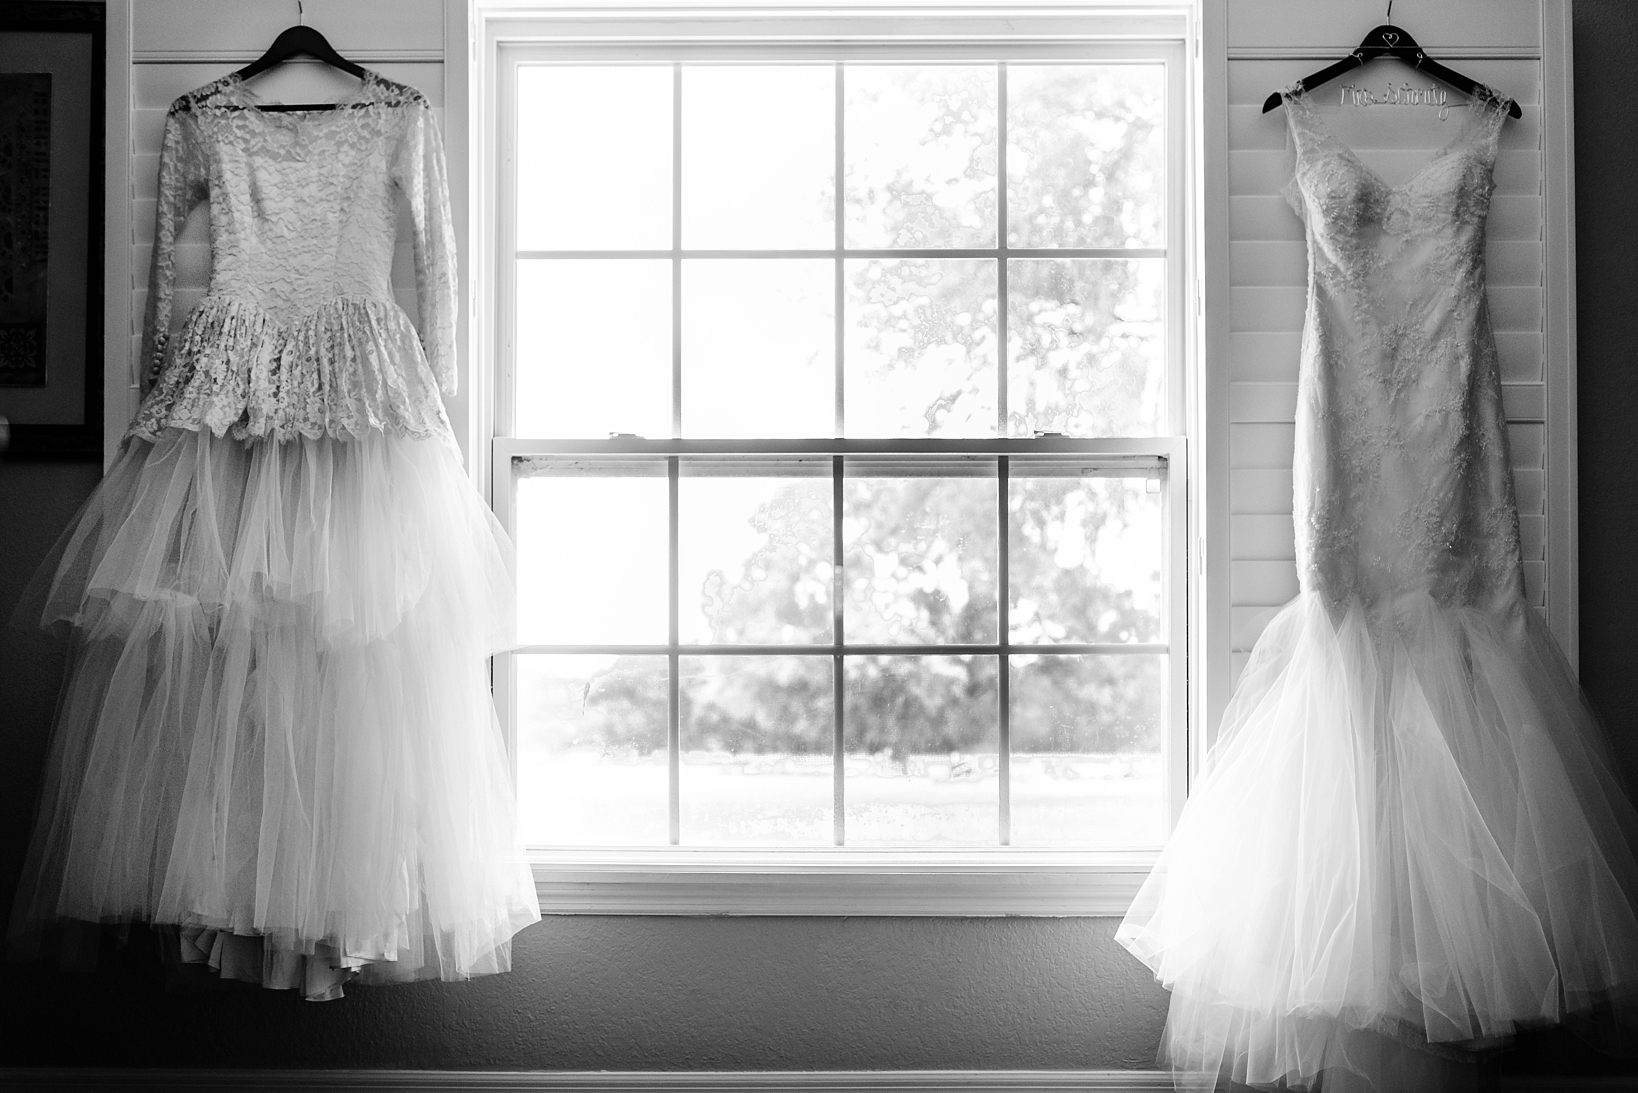 Bride's wedding dress and her grandmother's wedding dress hanging together in the window